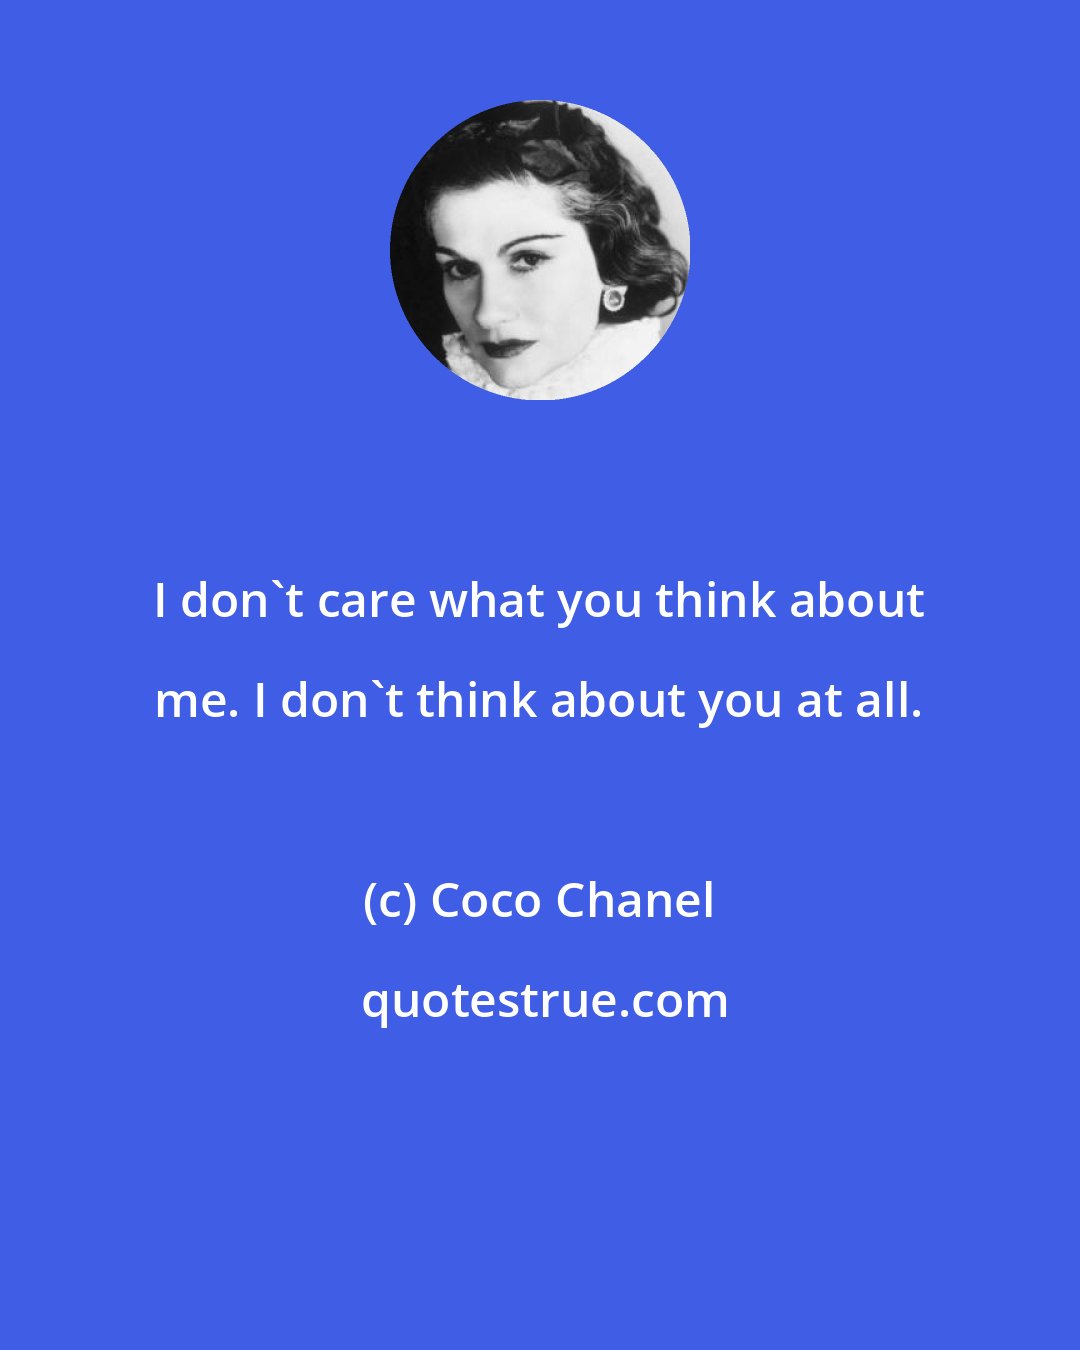 Coco Chanel: I don't care what you think about me. I don't think about you at all.